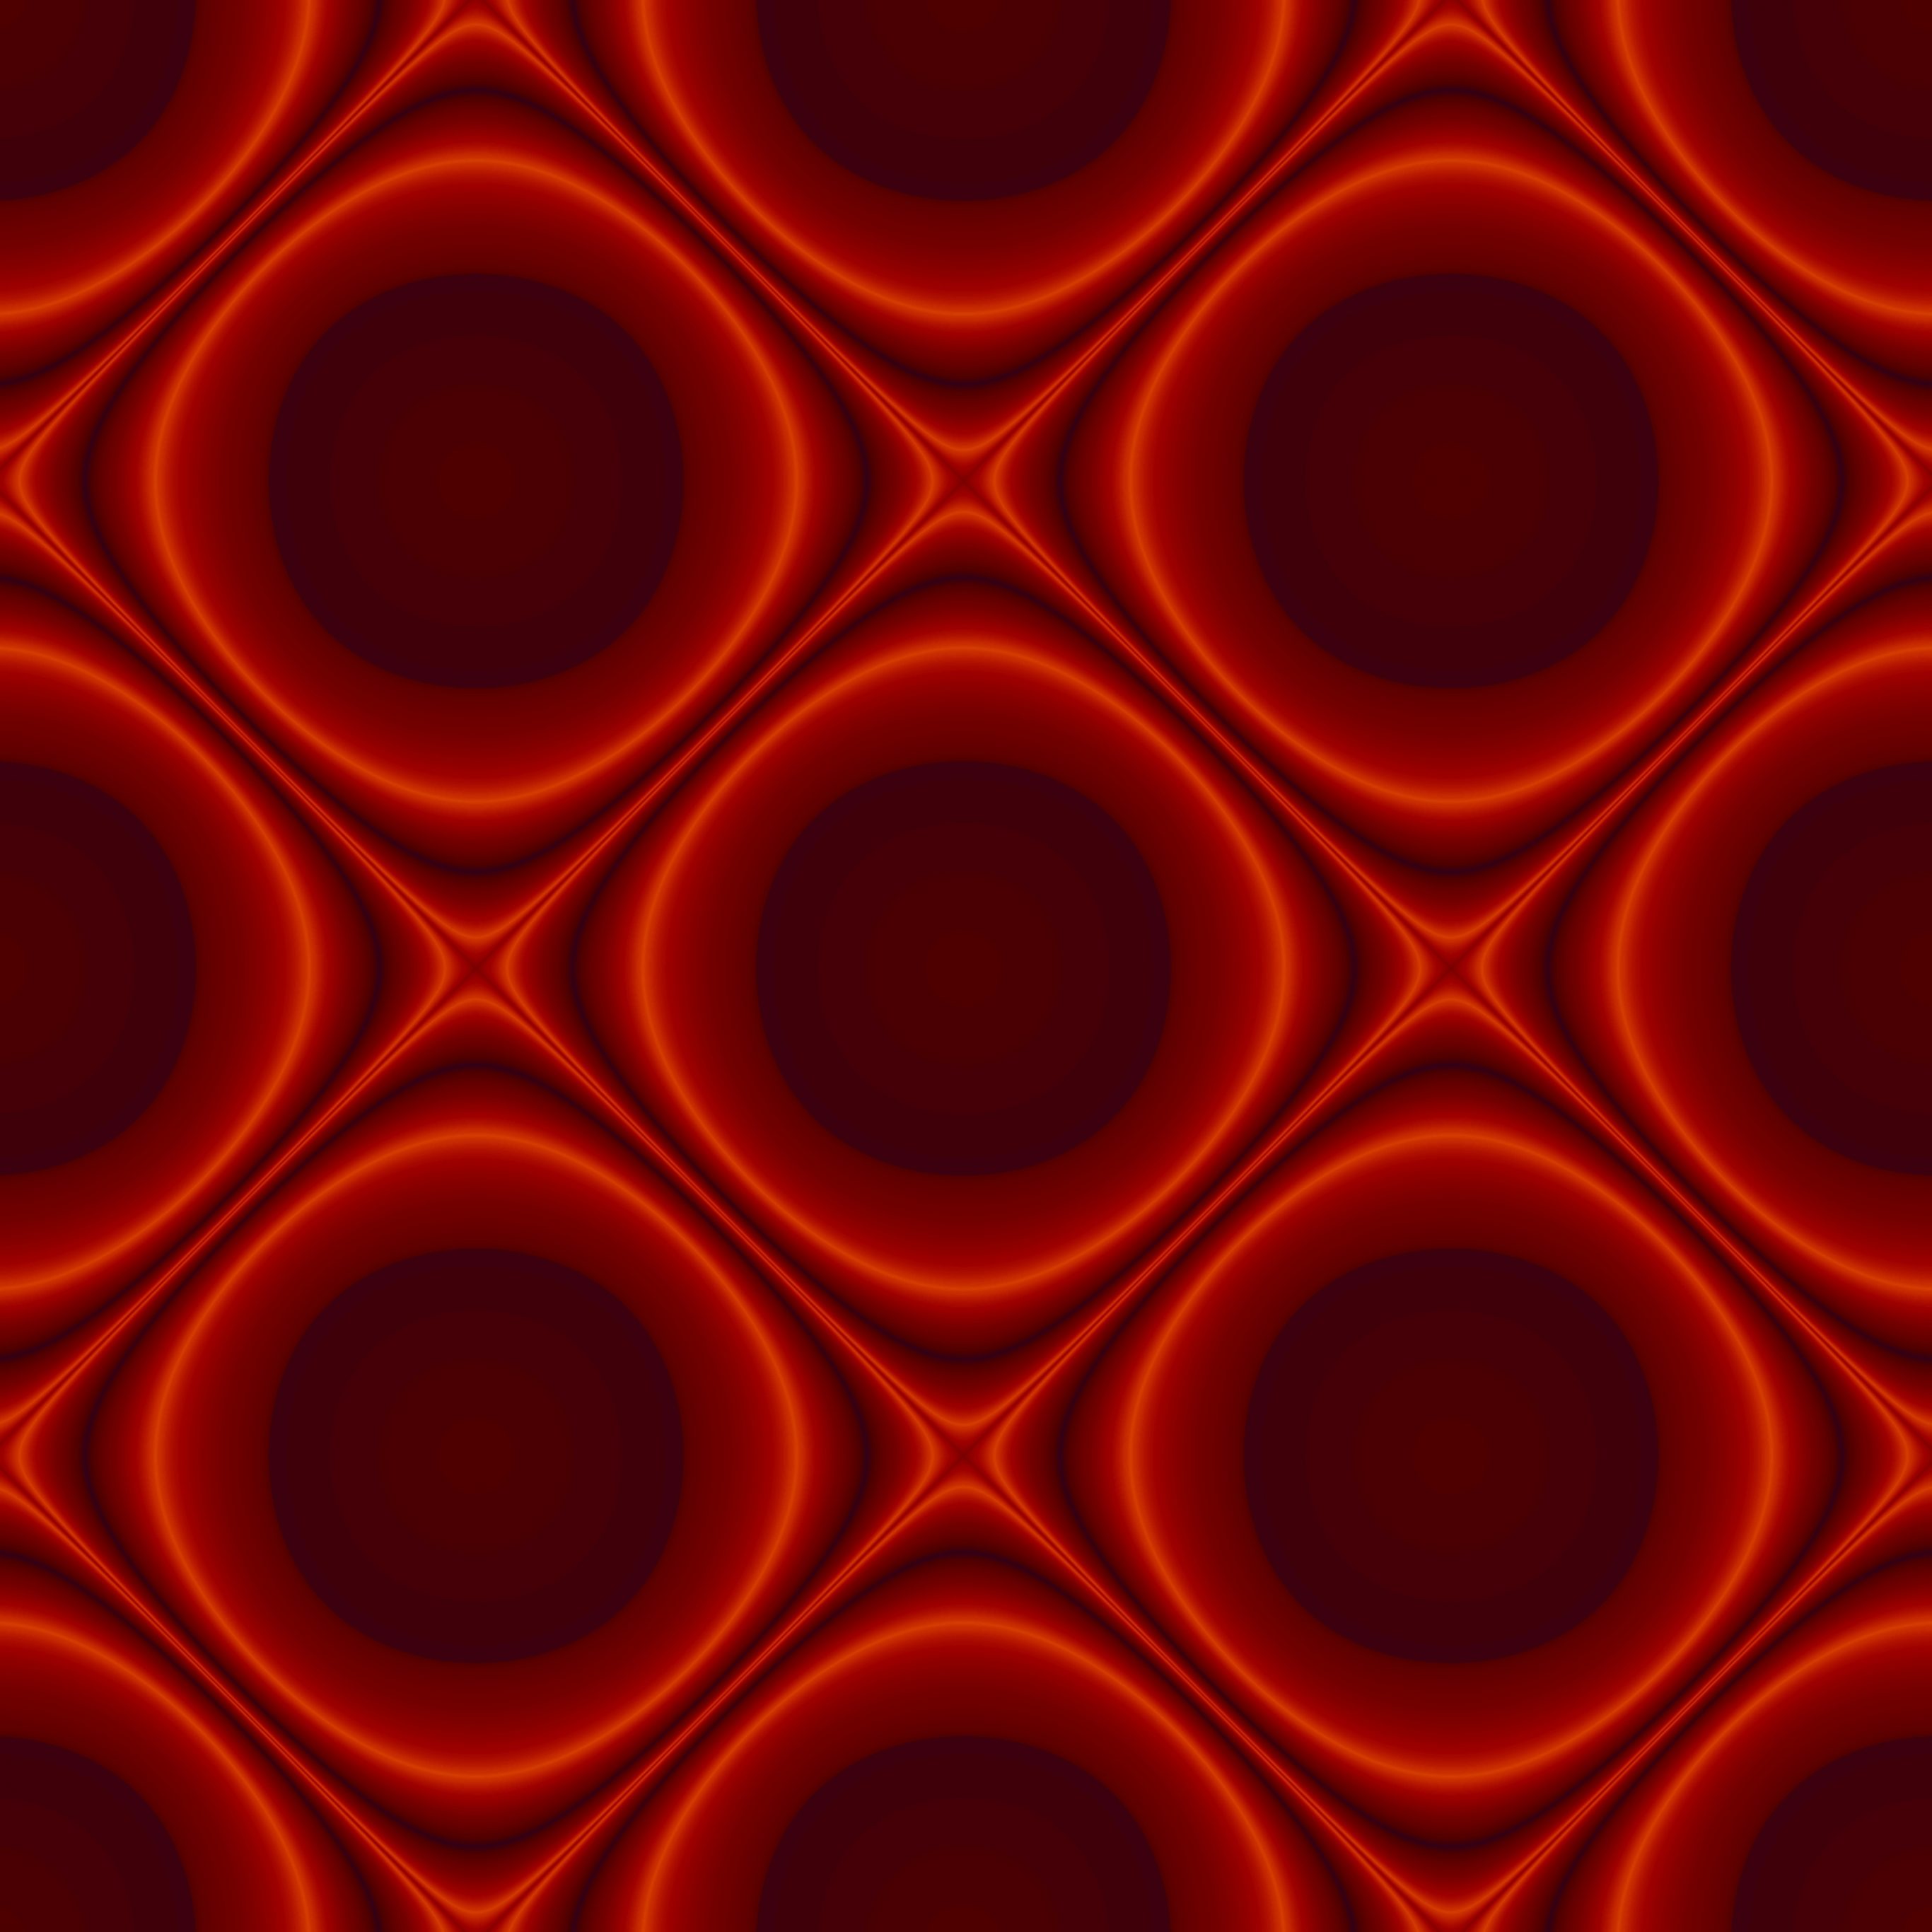 iPad Pro 12.9 wallpapers Abstract Pattern Design Red Ipad Wallpaper